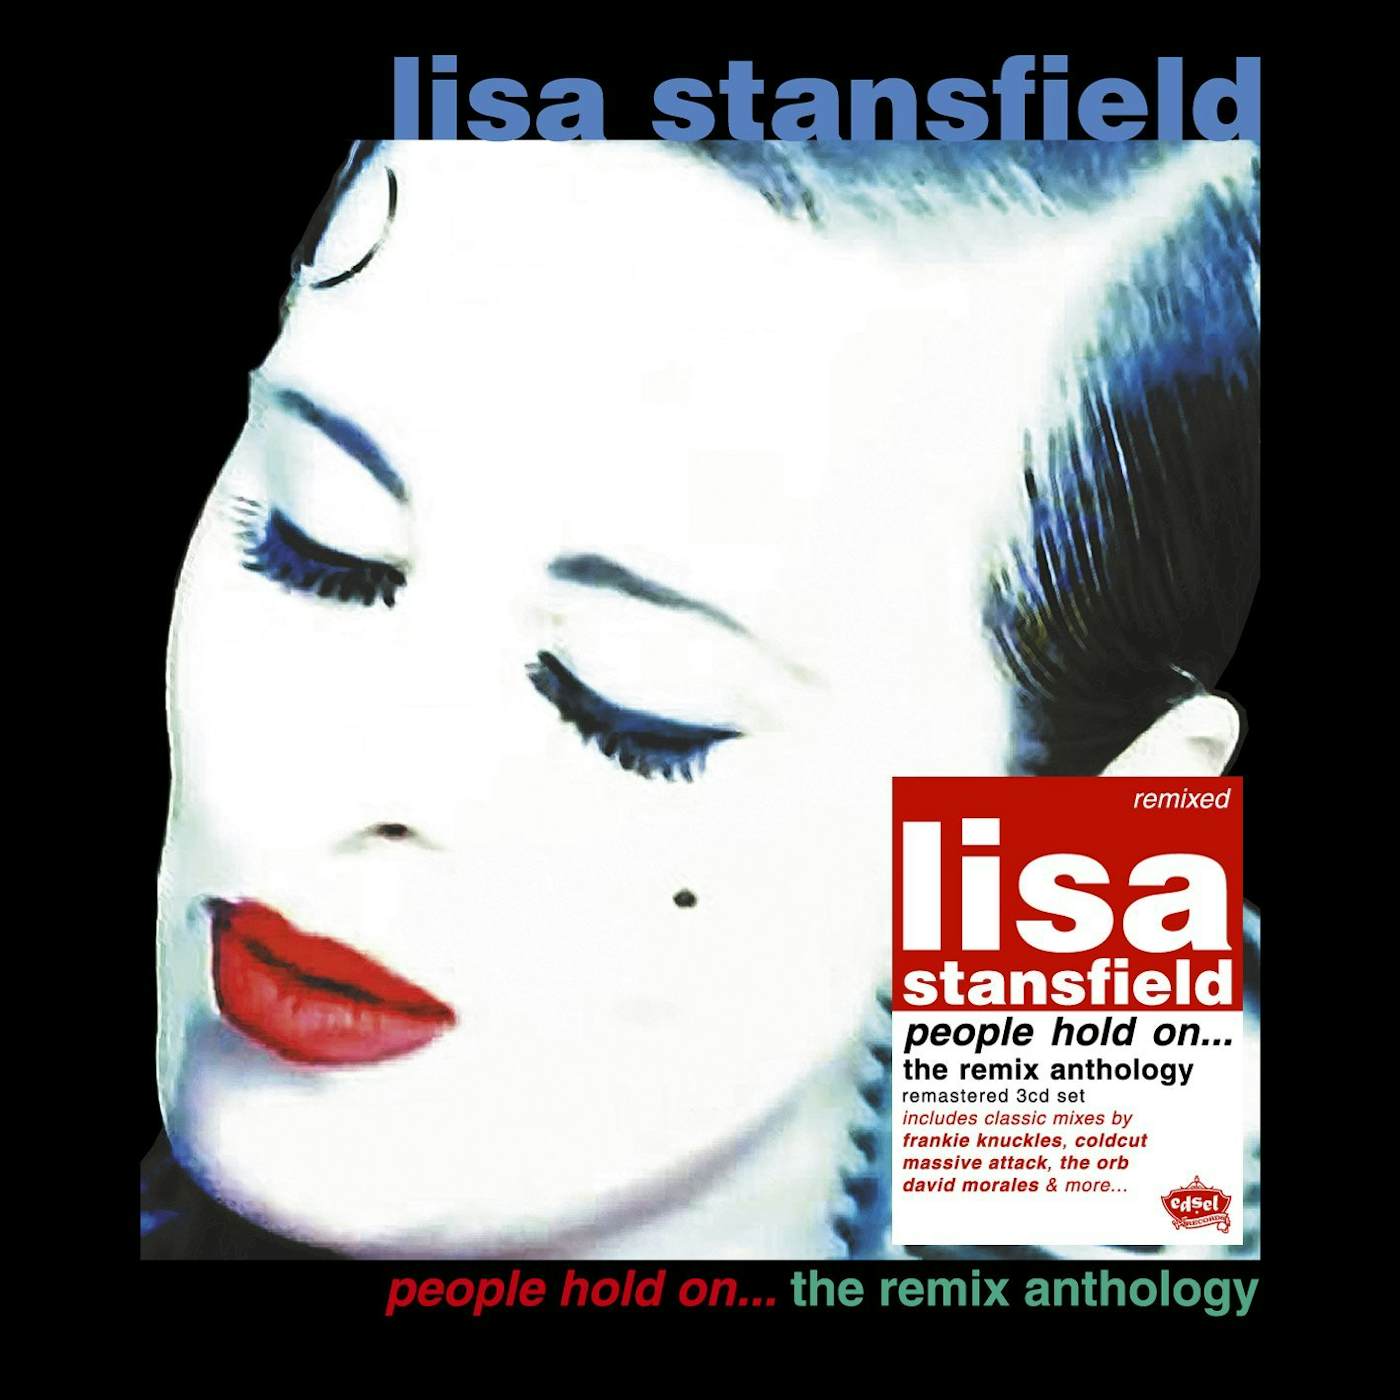 Lisa Stansfield PEOPLE HOLD ON THE REMIX ANTHOLOGY CD